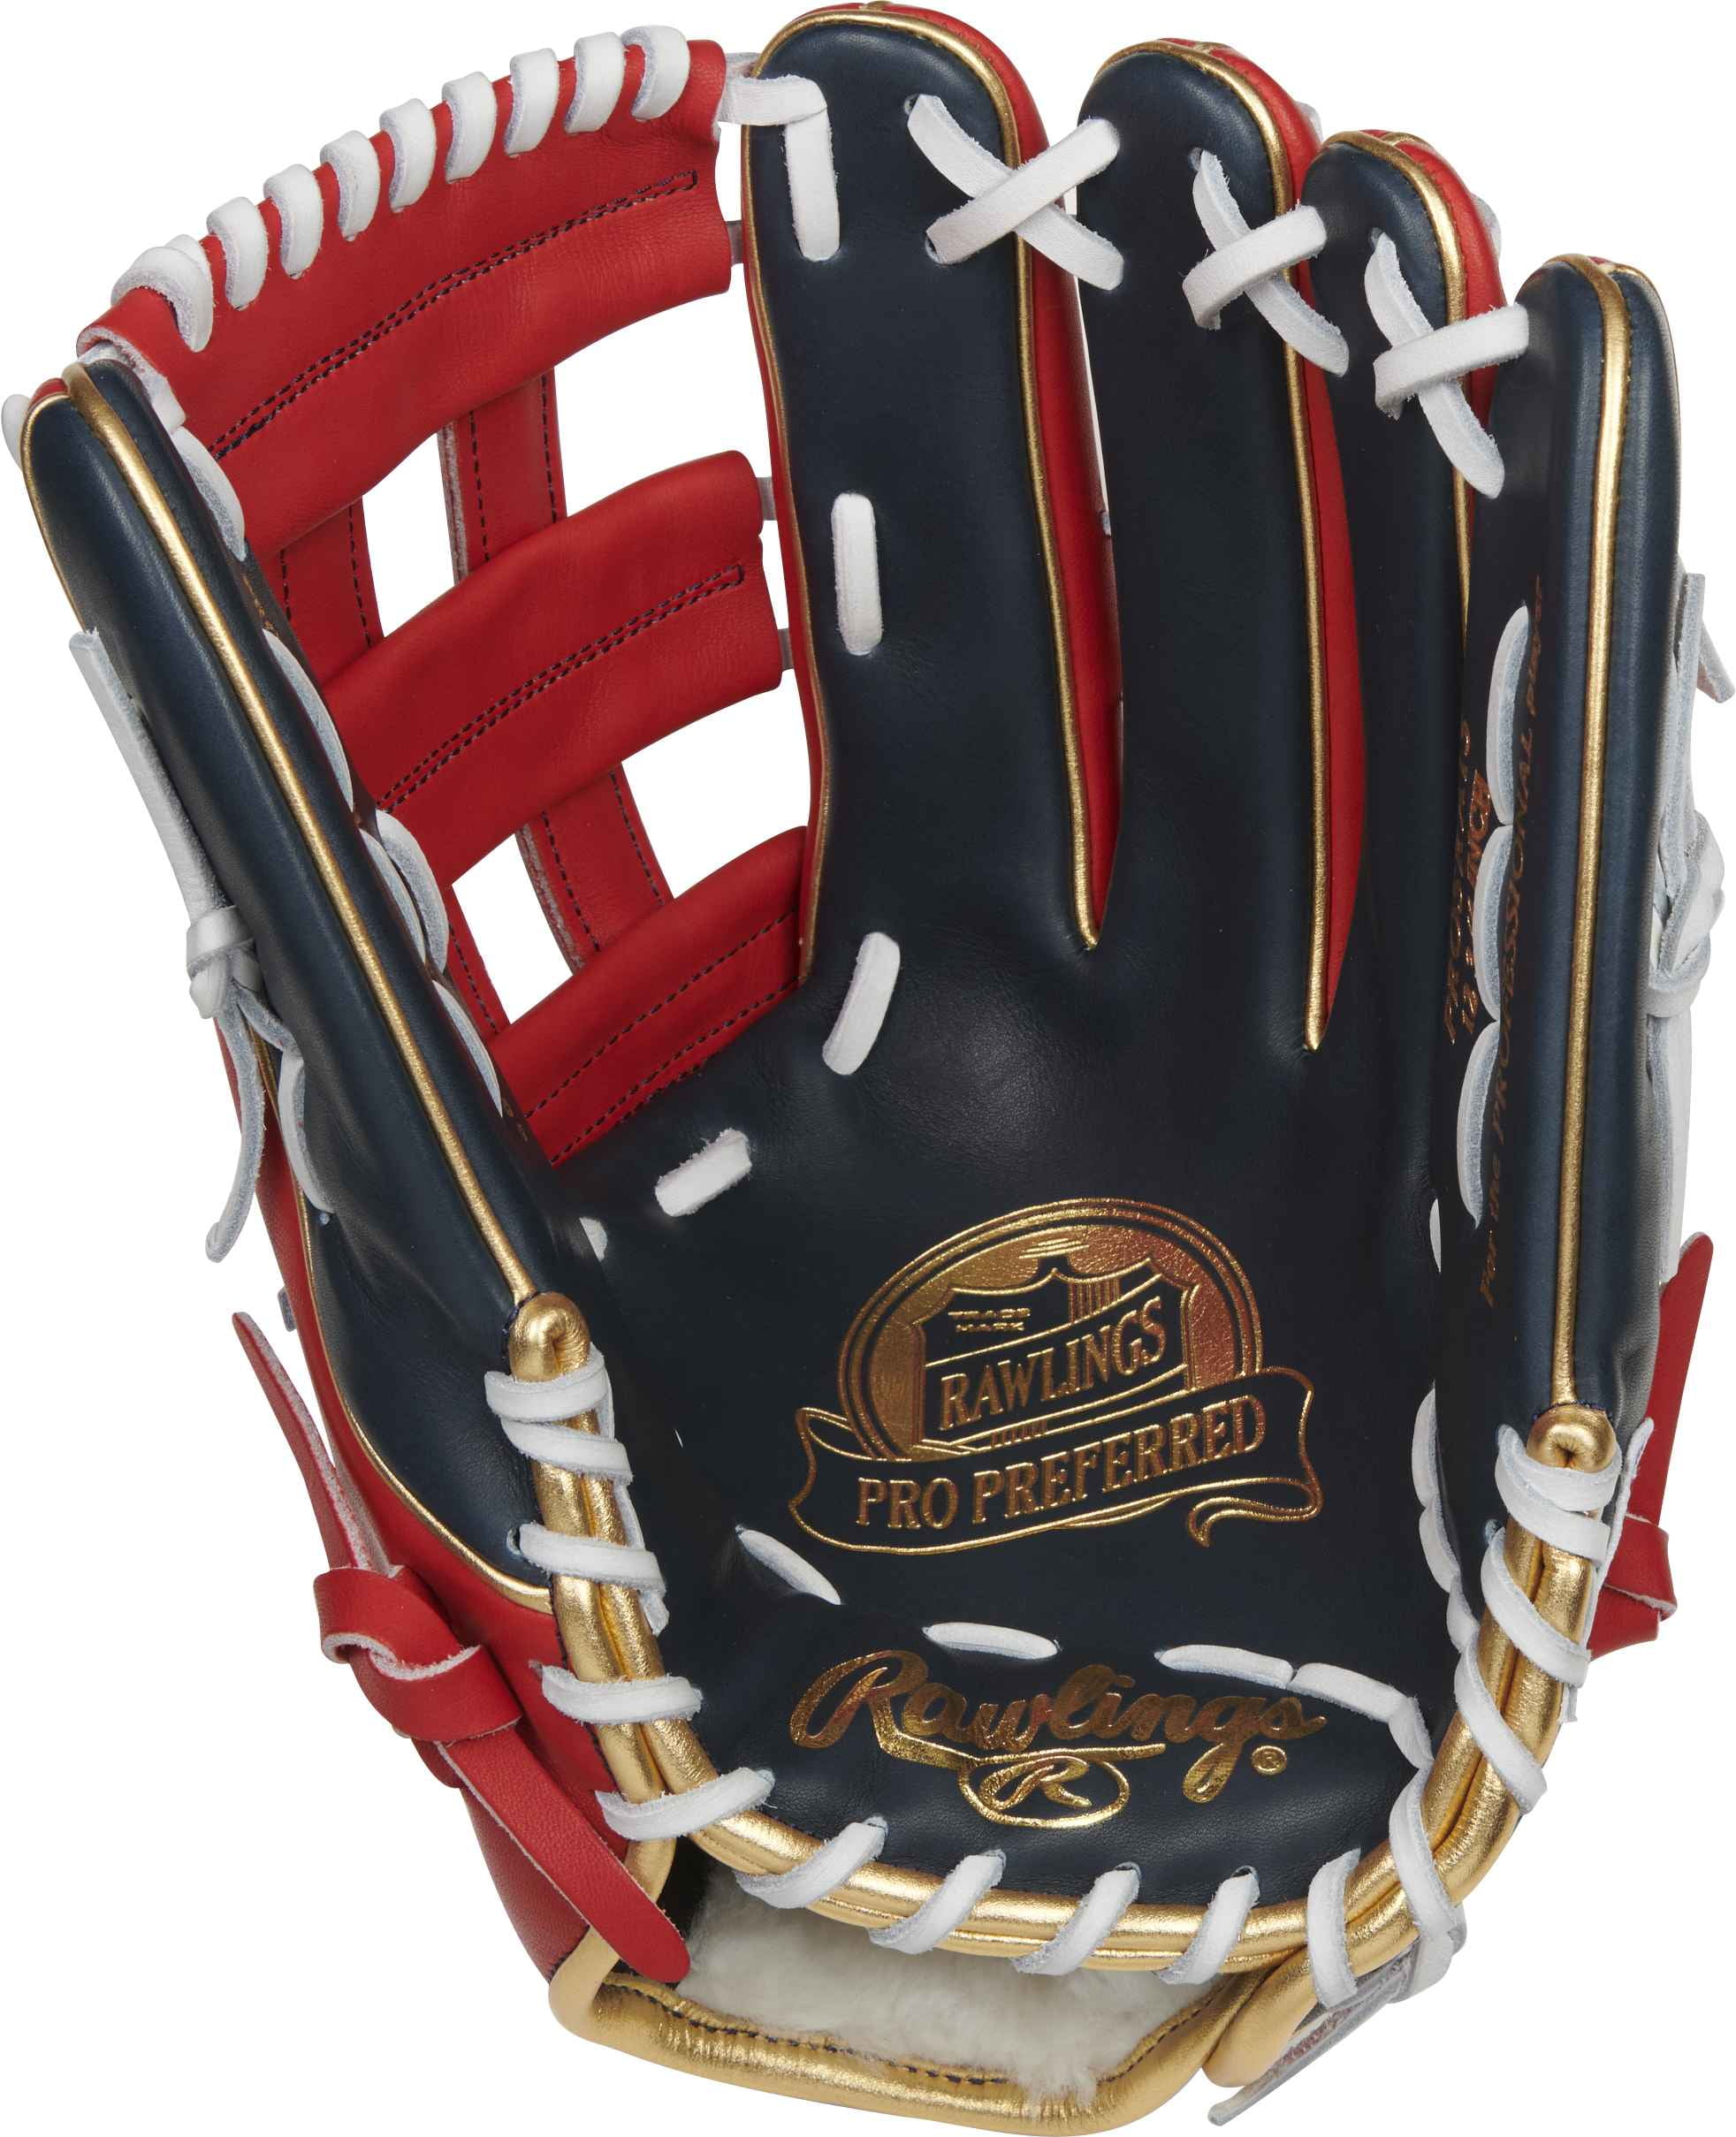 Rawlings Pro Preferred 12.75-inch Glove - Ronald Acuna Jr., Right Hand  Throw